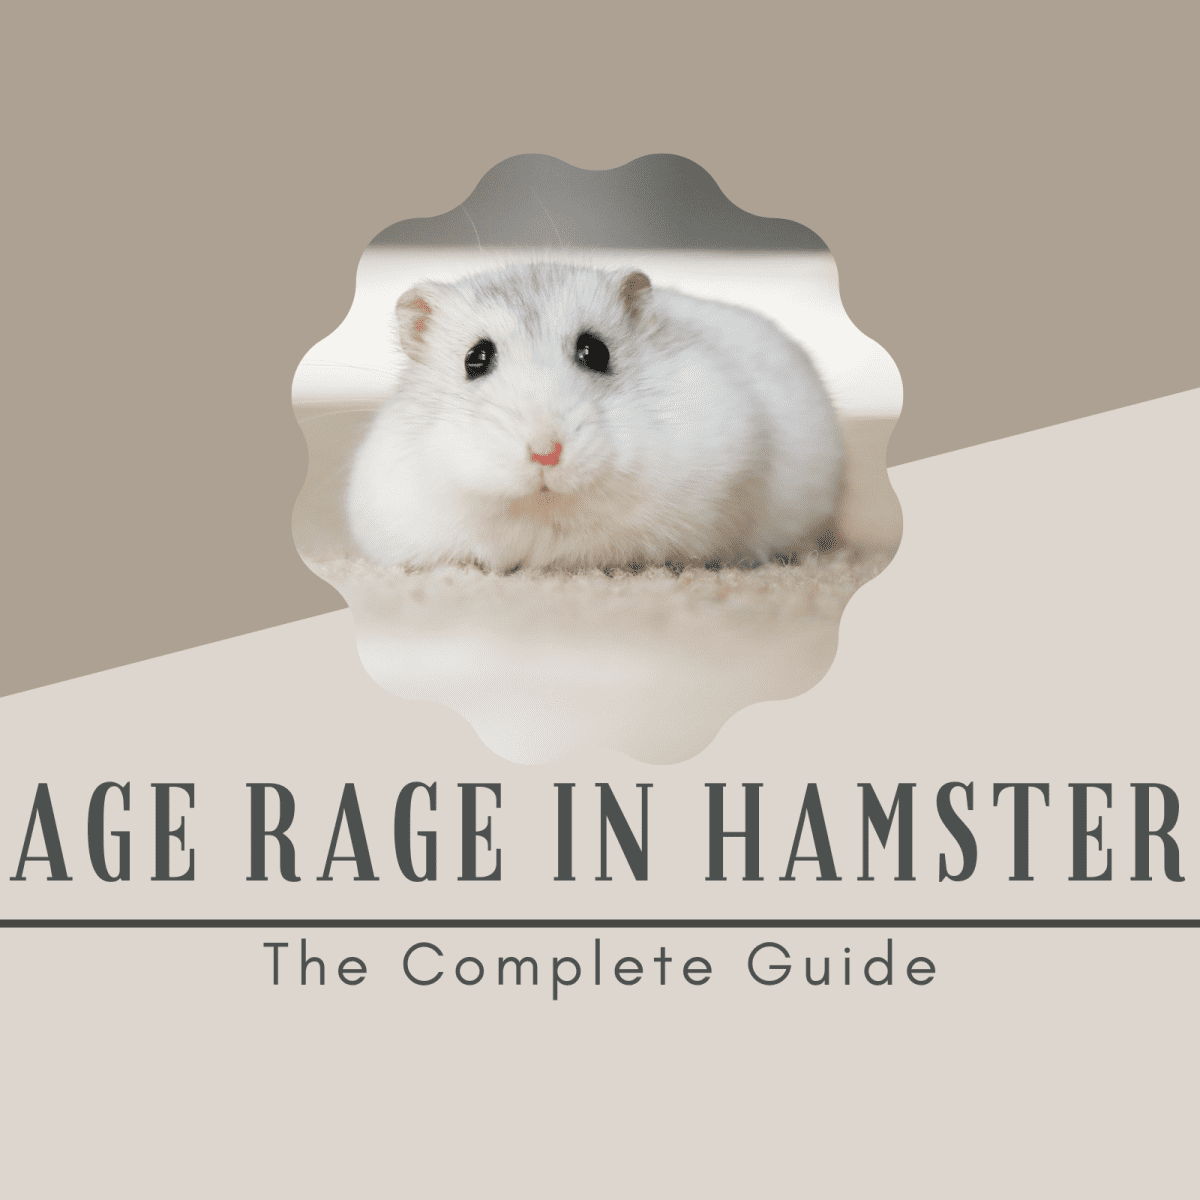 Cage Rage in Hamsters: The Complete Guide - PetHelpful